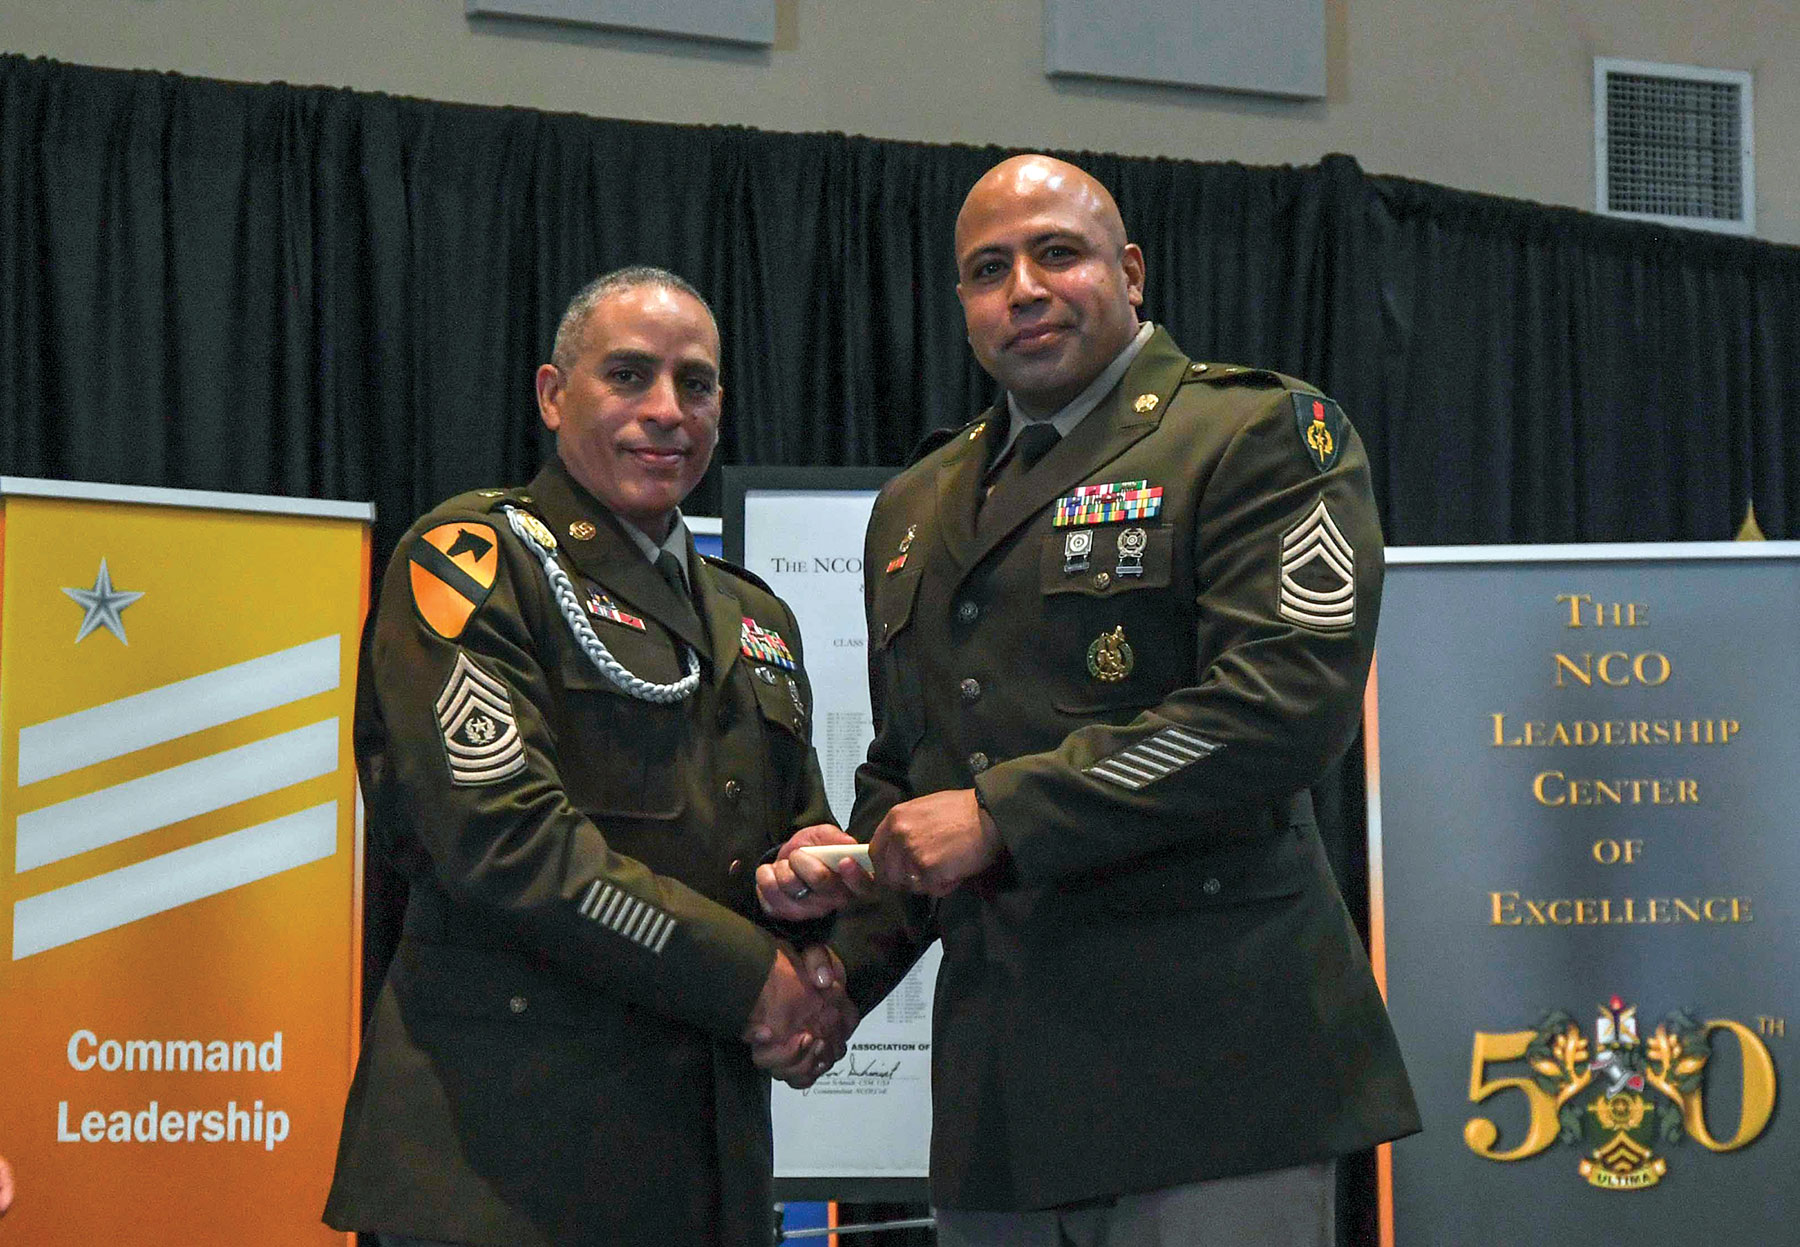 Master Sgt. Alberto Pena accepts his diploma from Command Sgt. Maj. Michael Arceneaux, Sergeants Major Academy director. (Photo by Andrew Smith, NCOLCoE Command Communications)